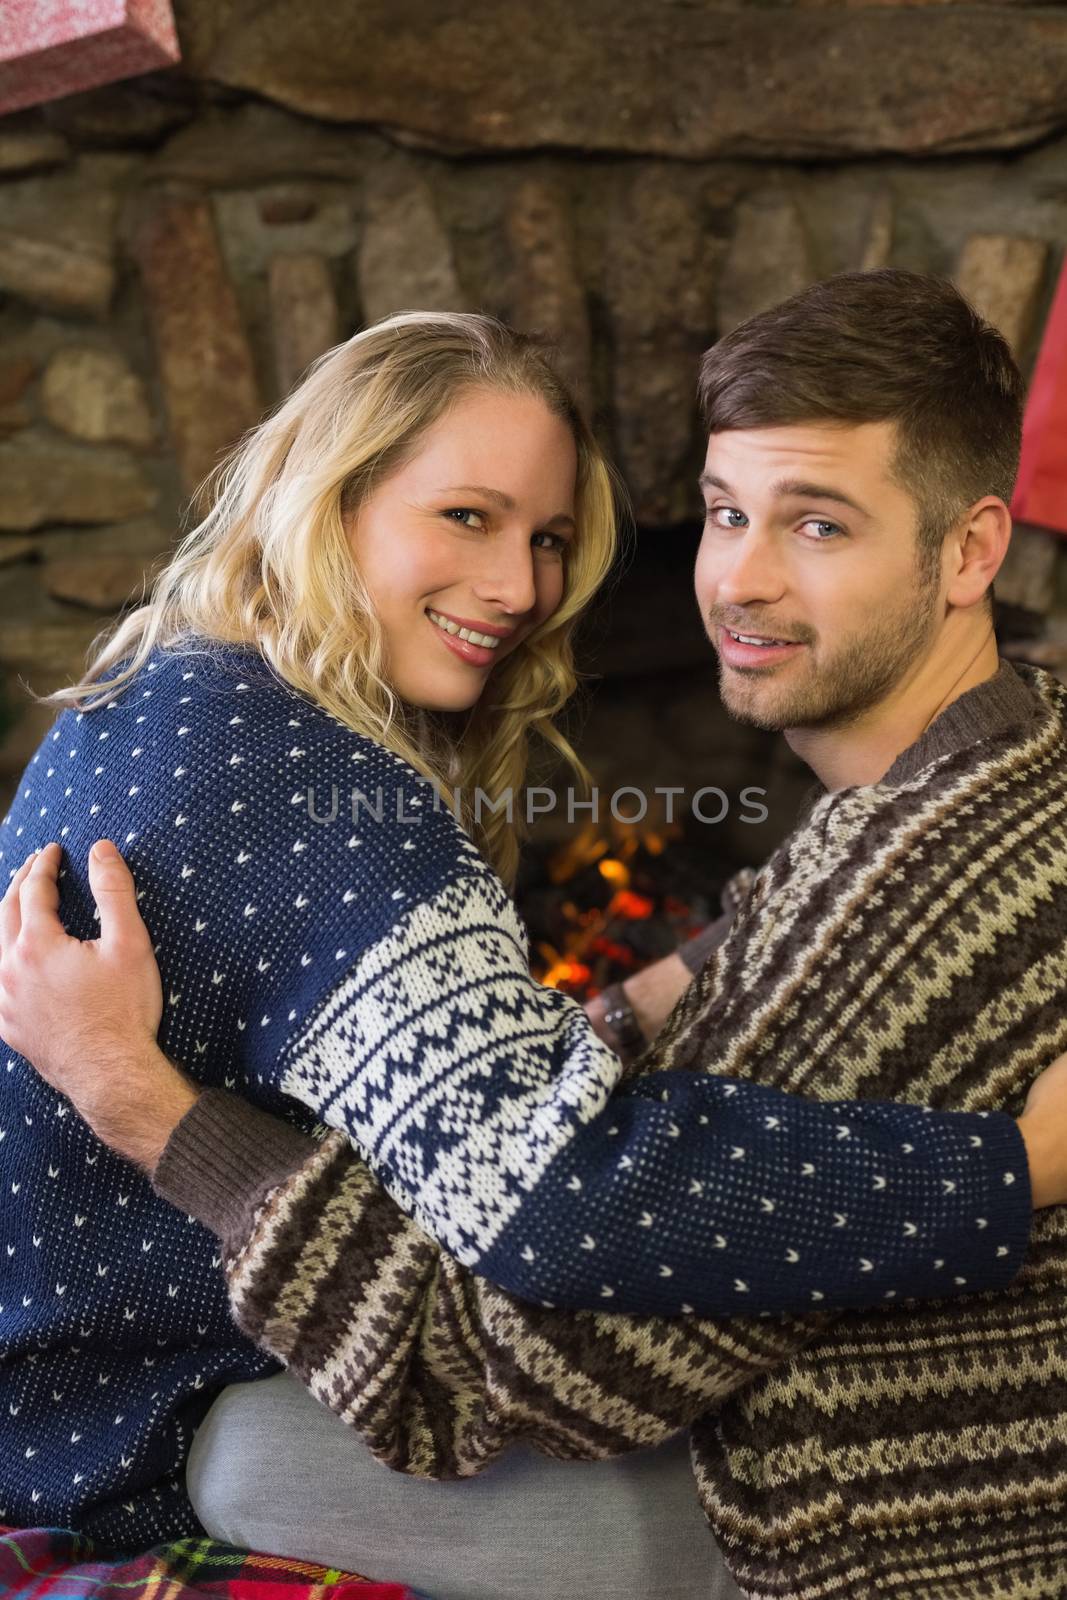 Rear view portrait of a romantic young couple smiling in front of fireplace